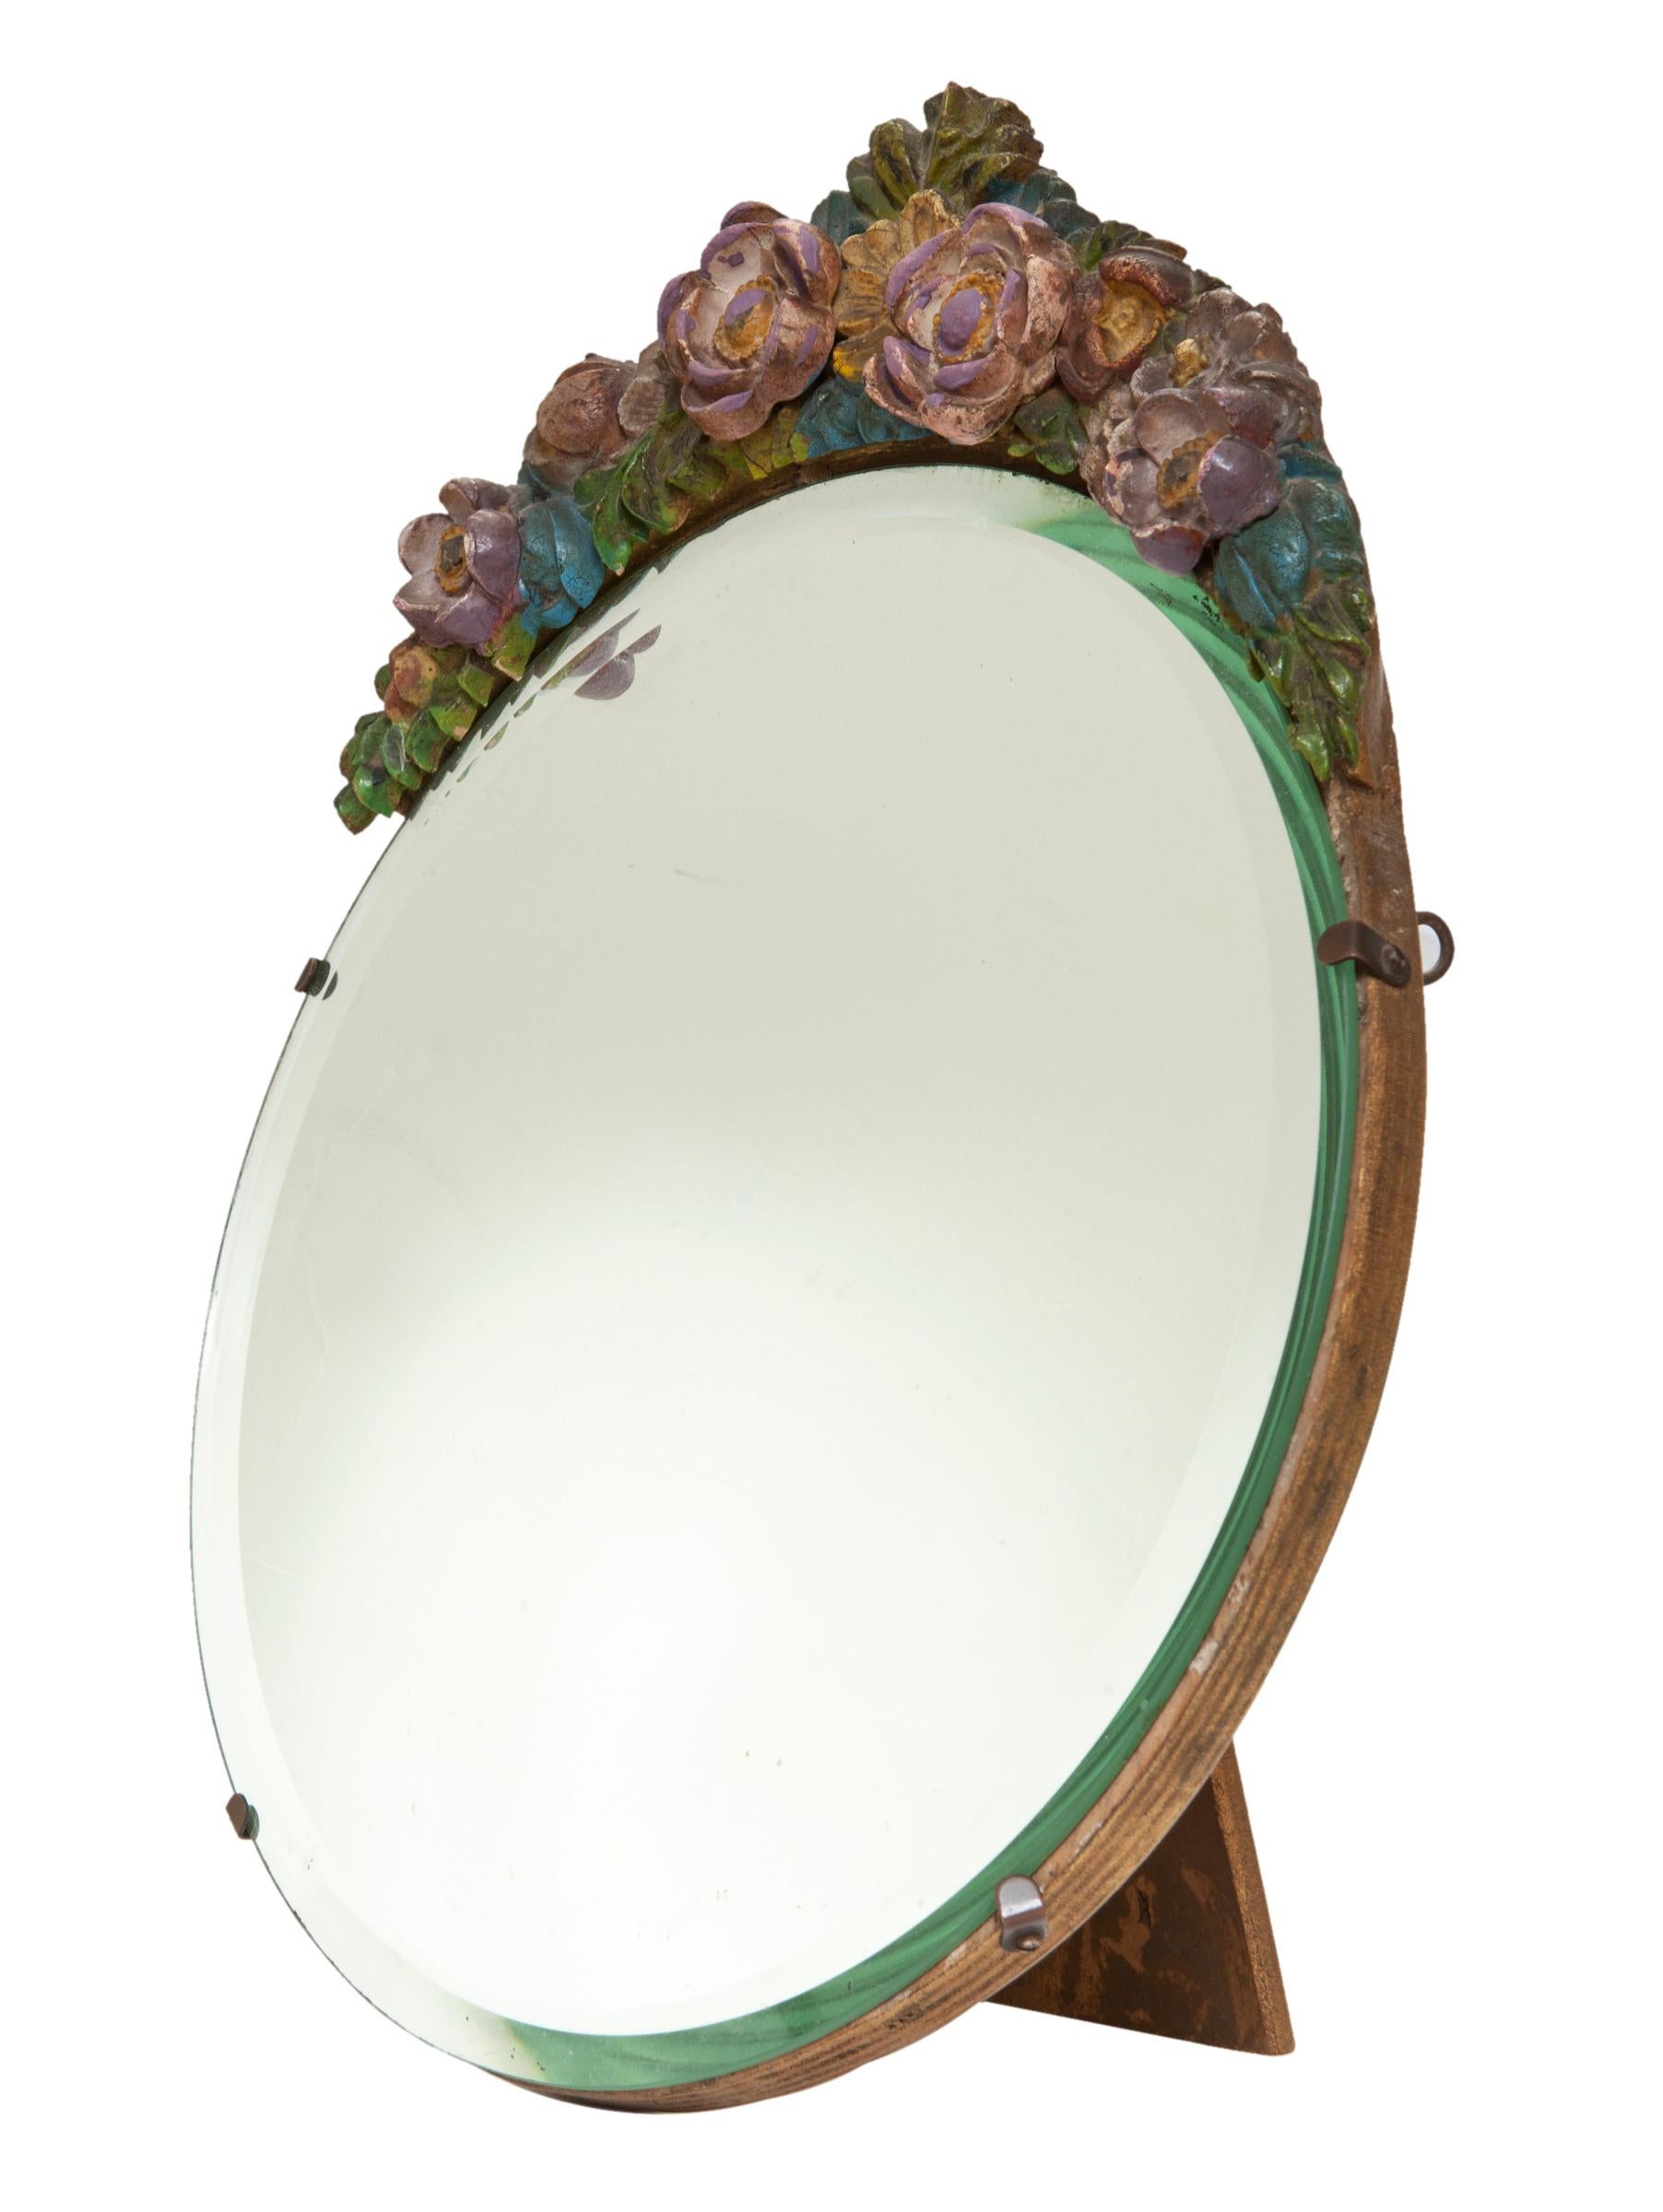 1930s Easel Table Mirror with muted floral crown.
Original Barbola Easel Mirror with narrow bevel & heavy hardwood frame. The painted finish is original, painted in the colors of Autumn.